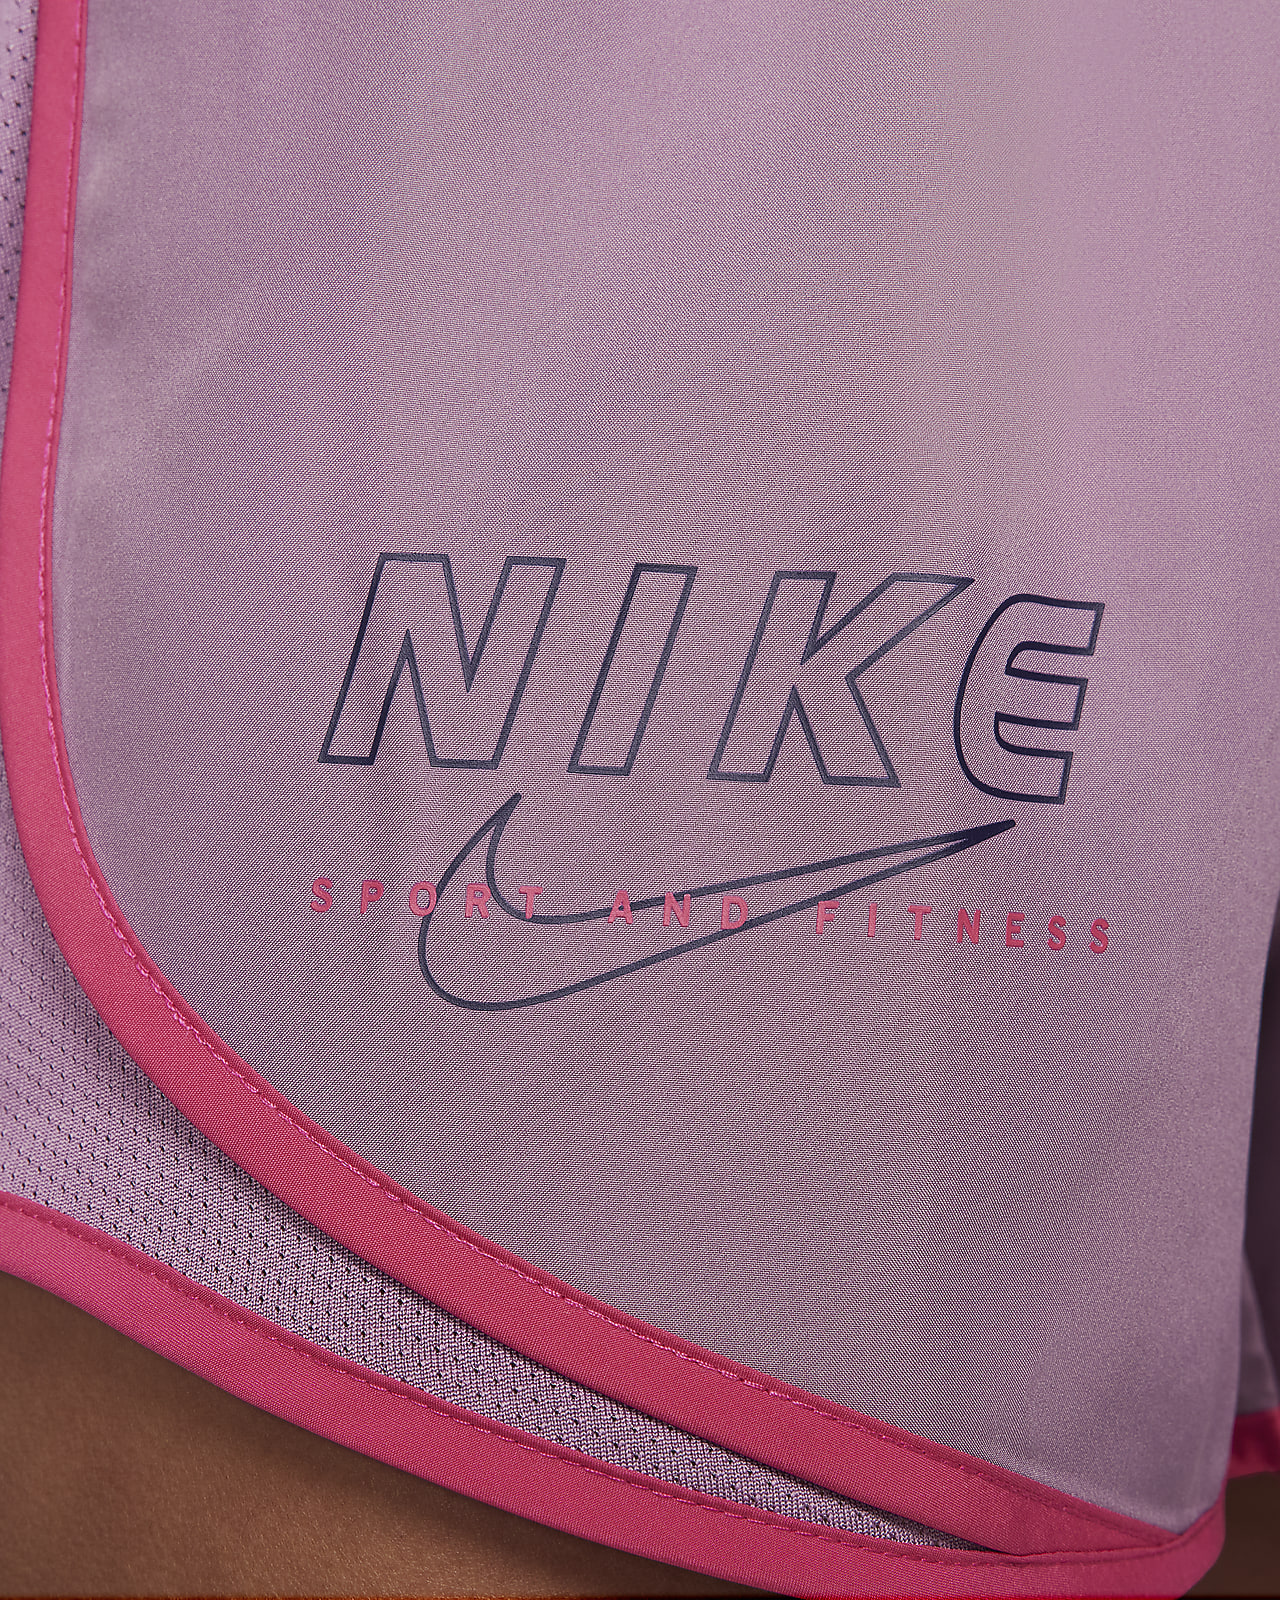 Nike Dri-FIT One Tempo Women's Brief-Lined Shorts. Nike ID